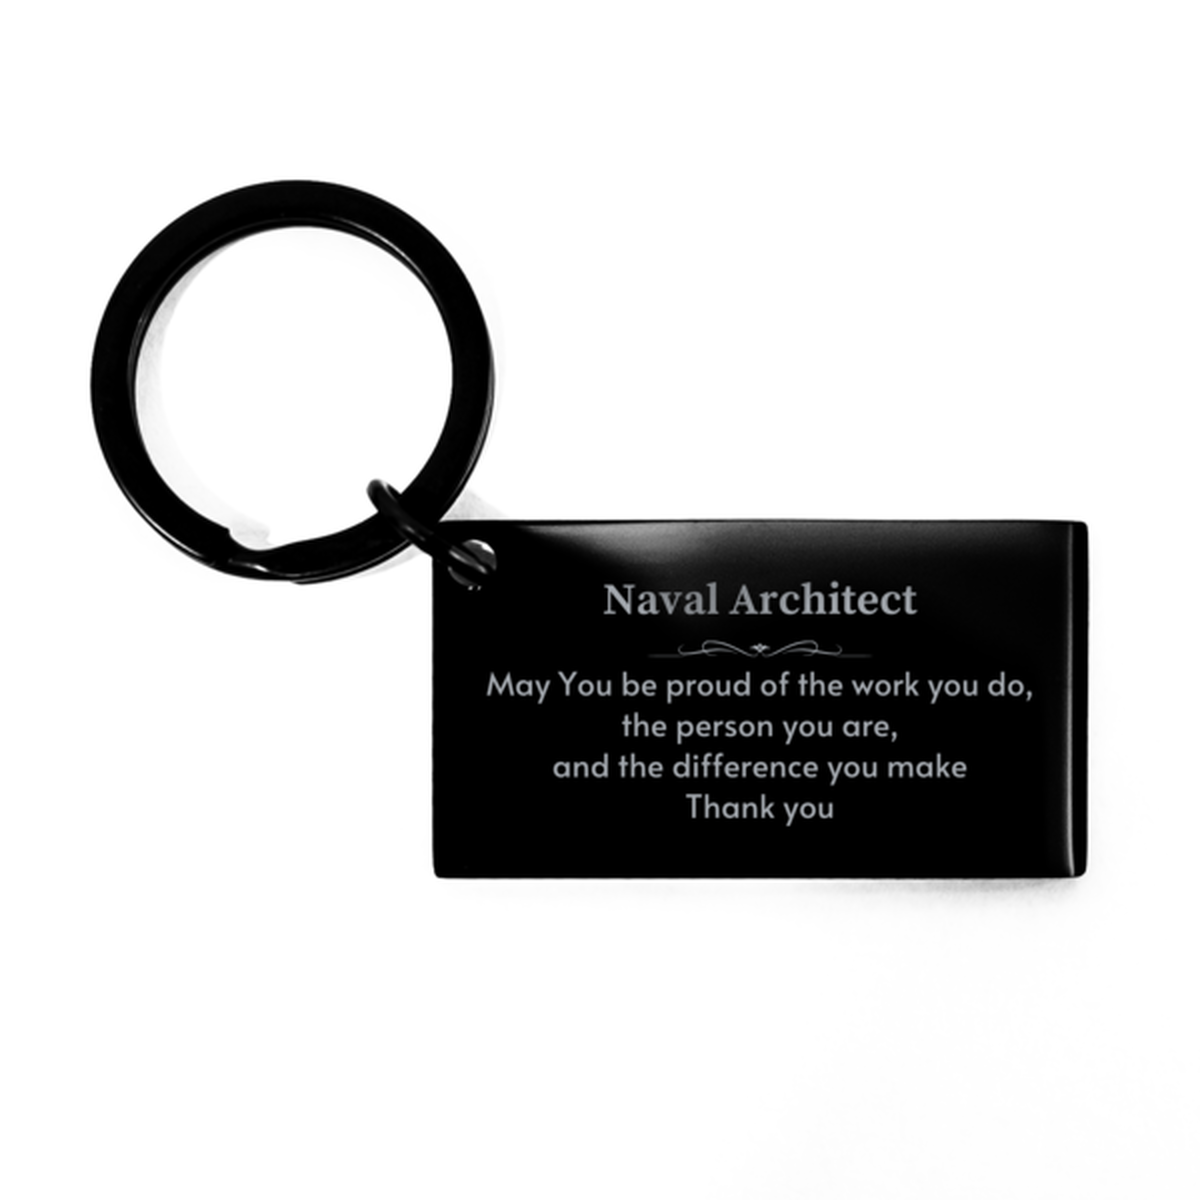 Heartwarming Keychain Retirement Coworkers Gifts for Naval Architect, Payroll Clerk May You be proud of the work you do, the person you are Gifts for Boss Men Women Friends